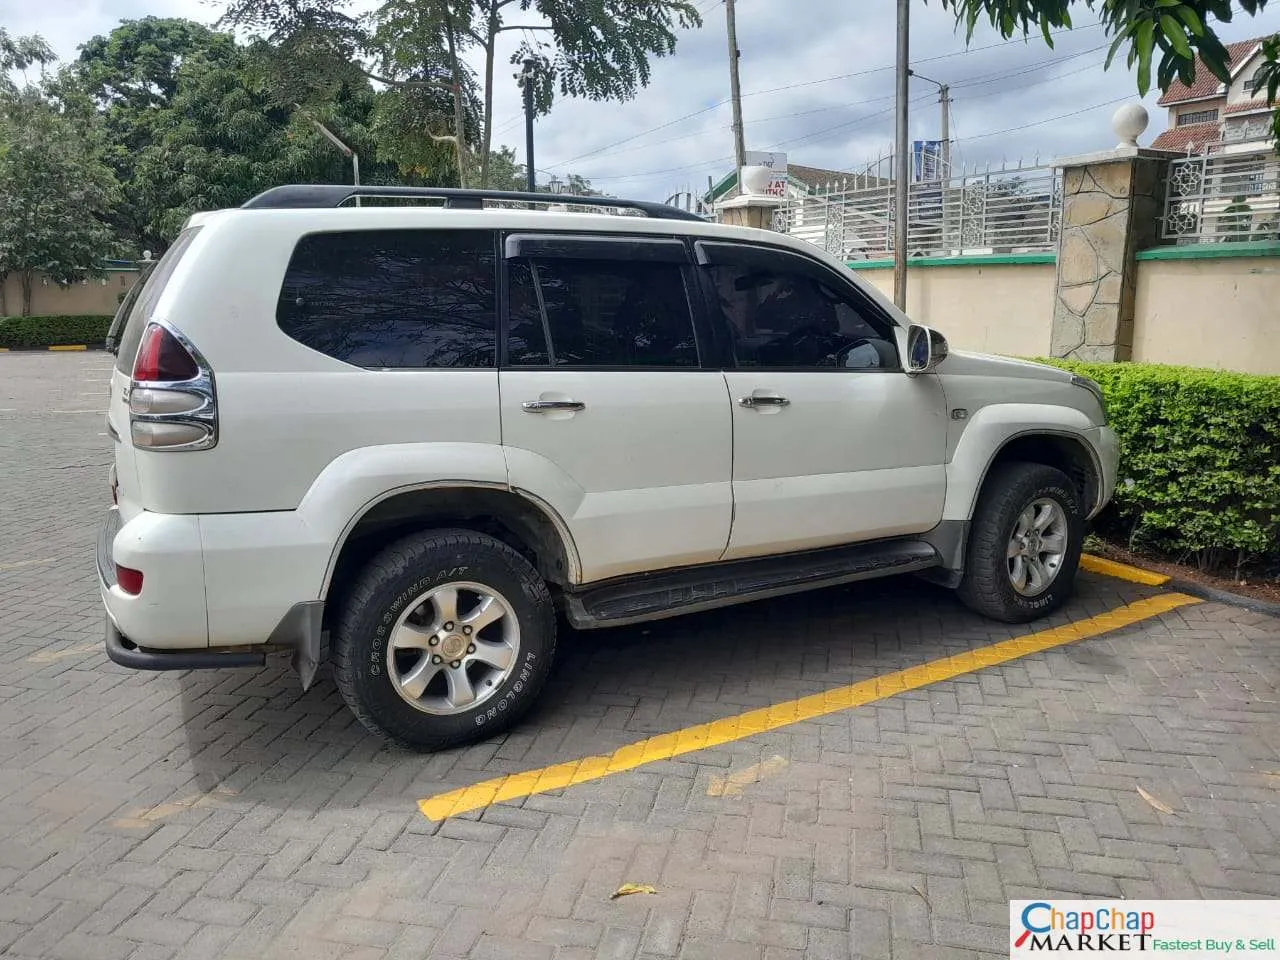 Cars Cars For Sale/Vehicles-Toyota Prado J120 🔥 You Pay 40% Deposit Trade in OK EXCLUSIVE 6